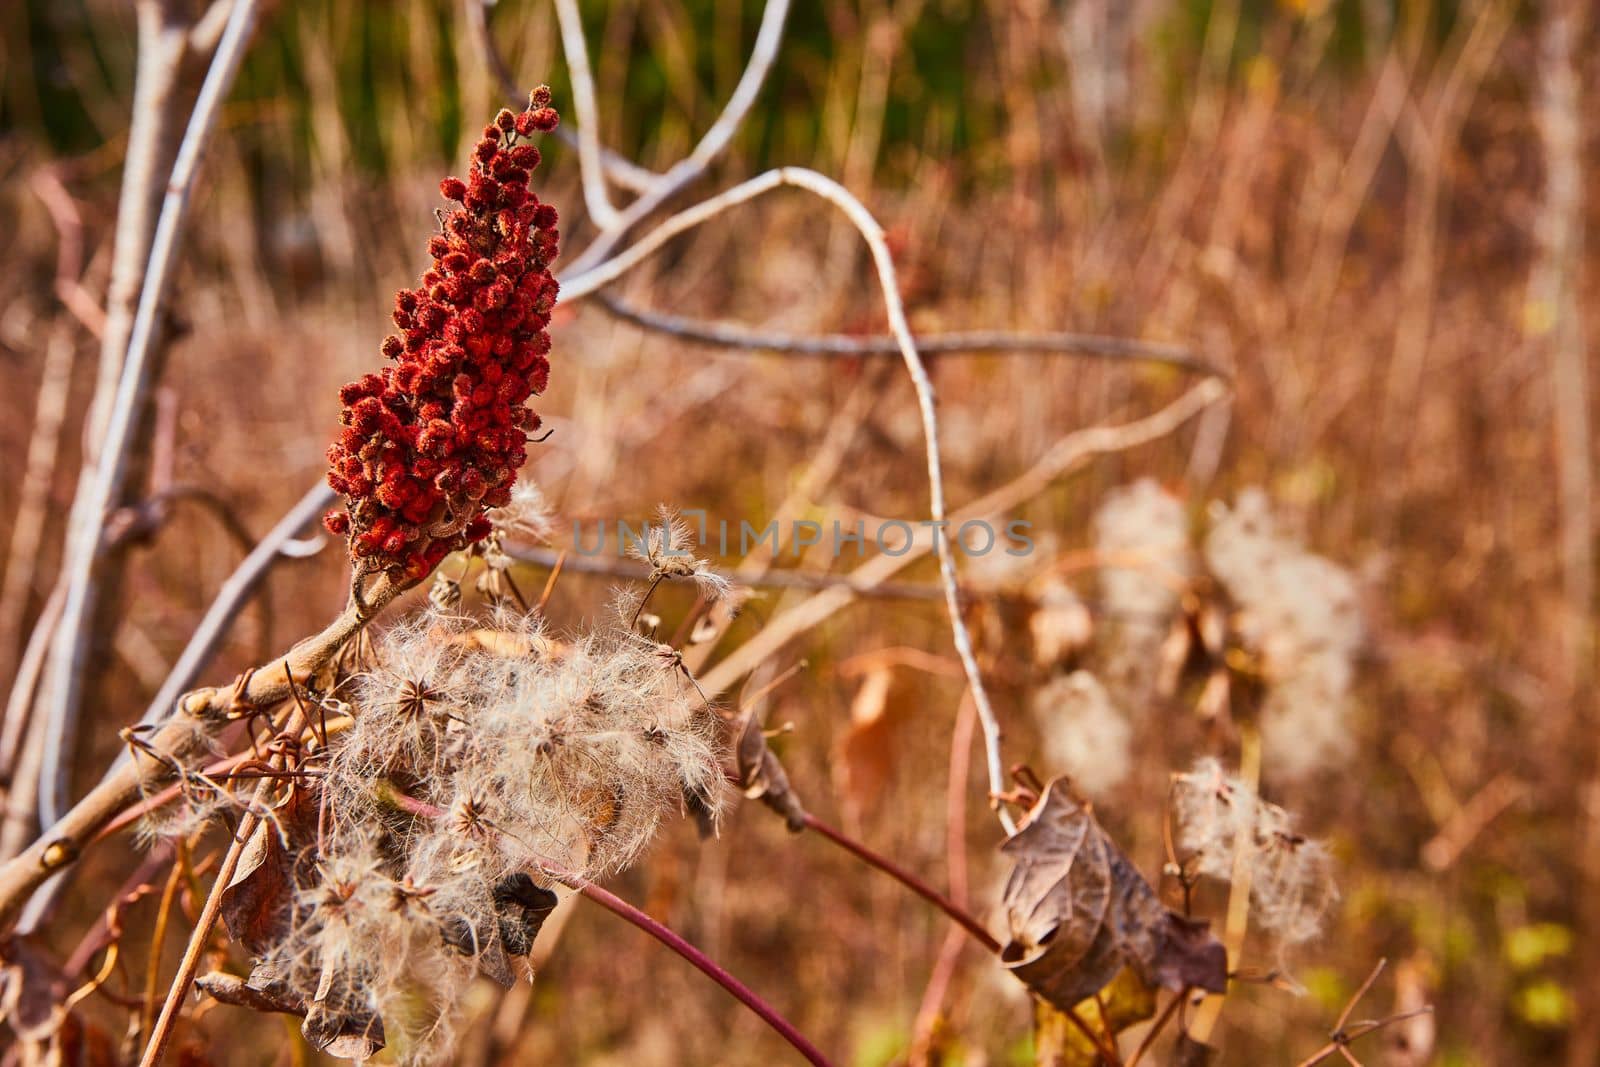 Fields of Staghorn sumac and milkweed pods in fields of light brown by njproductions